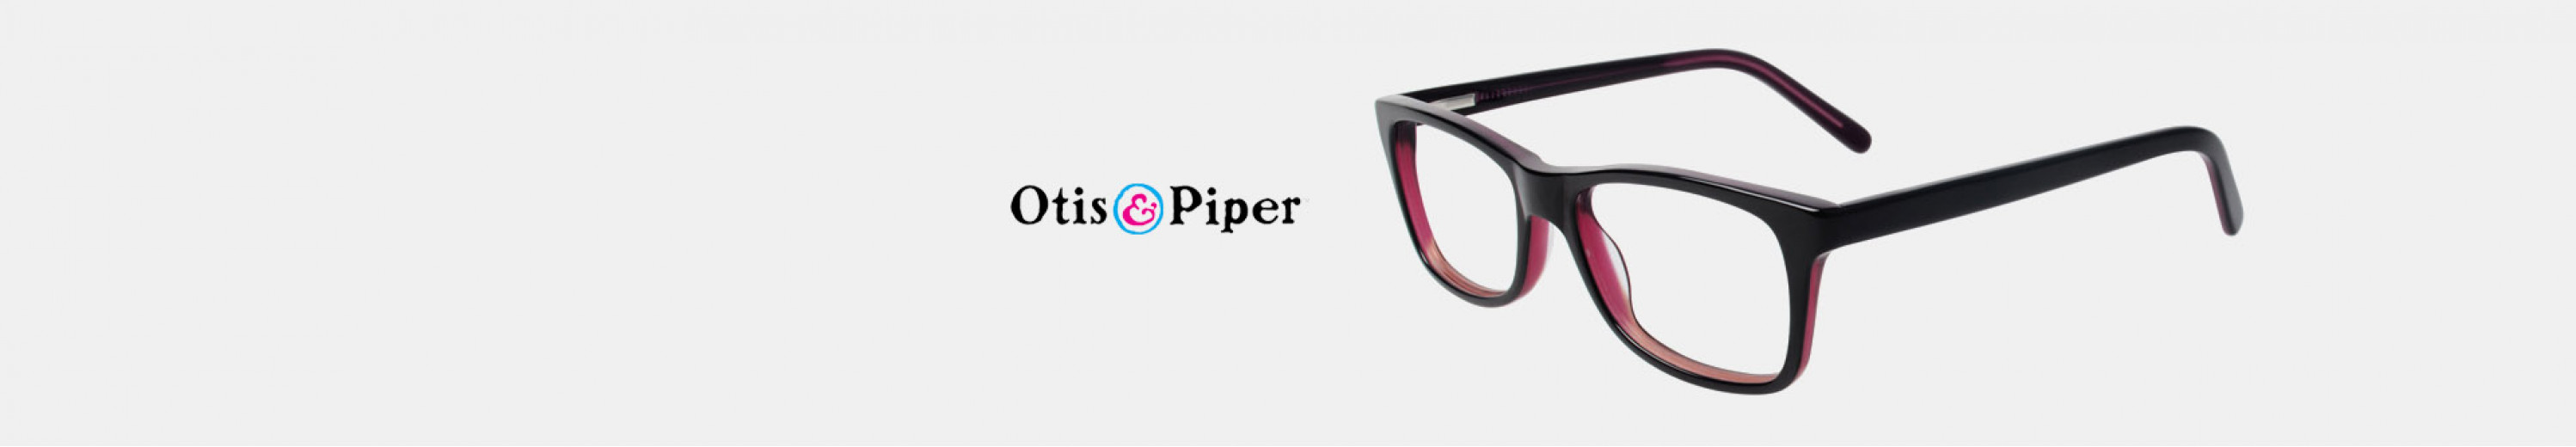 Otis and Piper Glasses and Eyewear